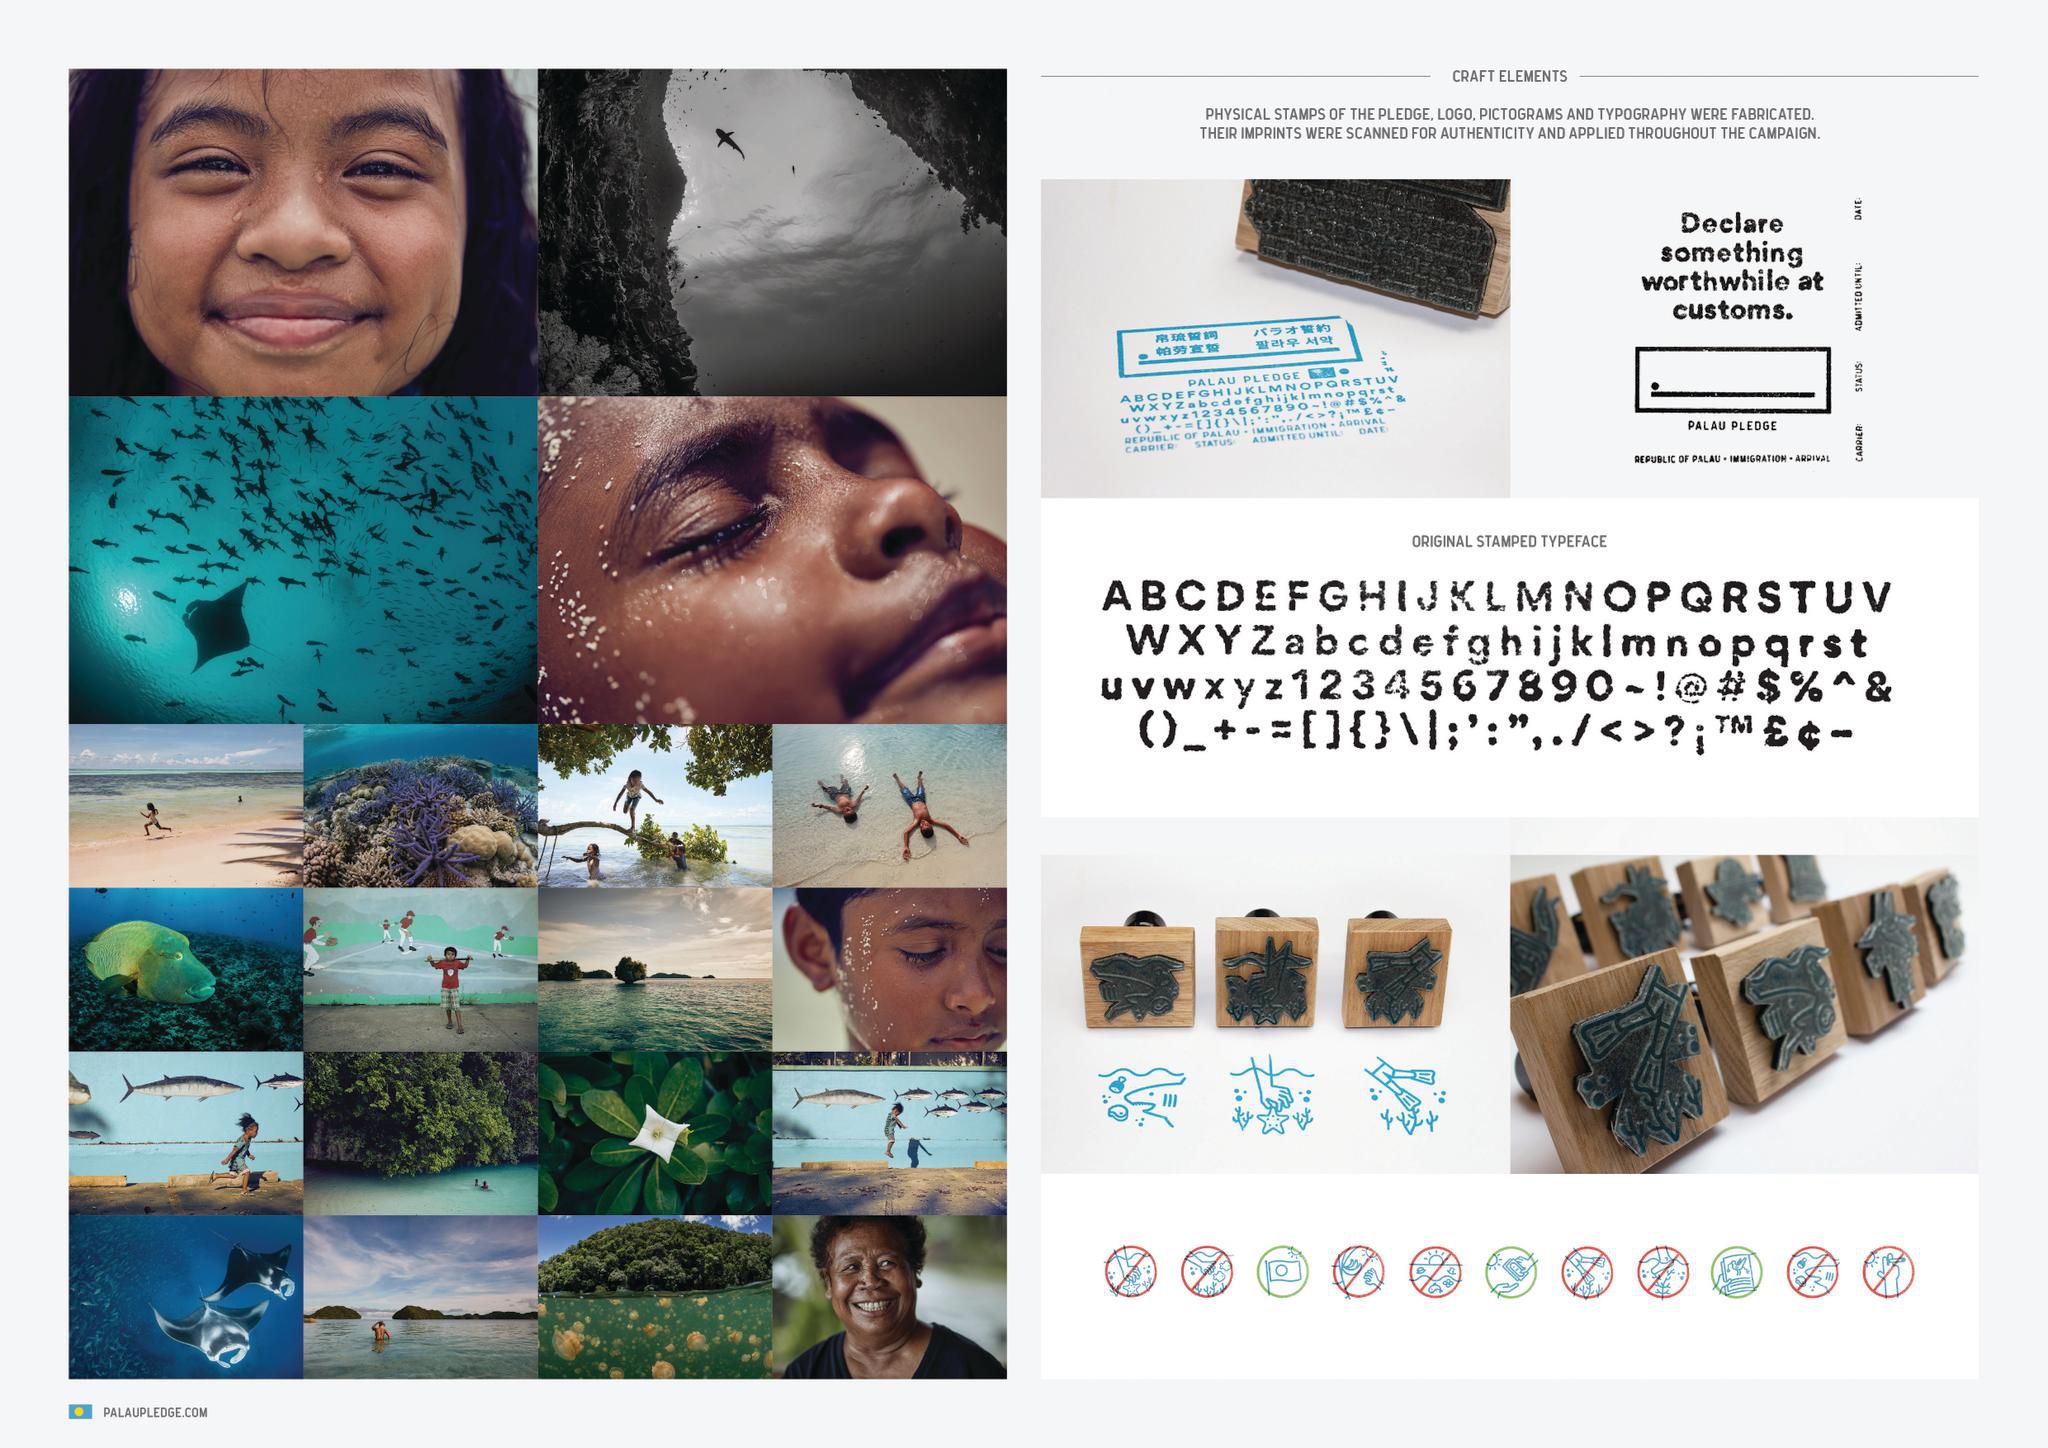 PALAU LEGACY PROJECT Palau Pledge HOSTHAVAS Cannes Lions 2018 Supporting Images from The Work 41